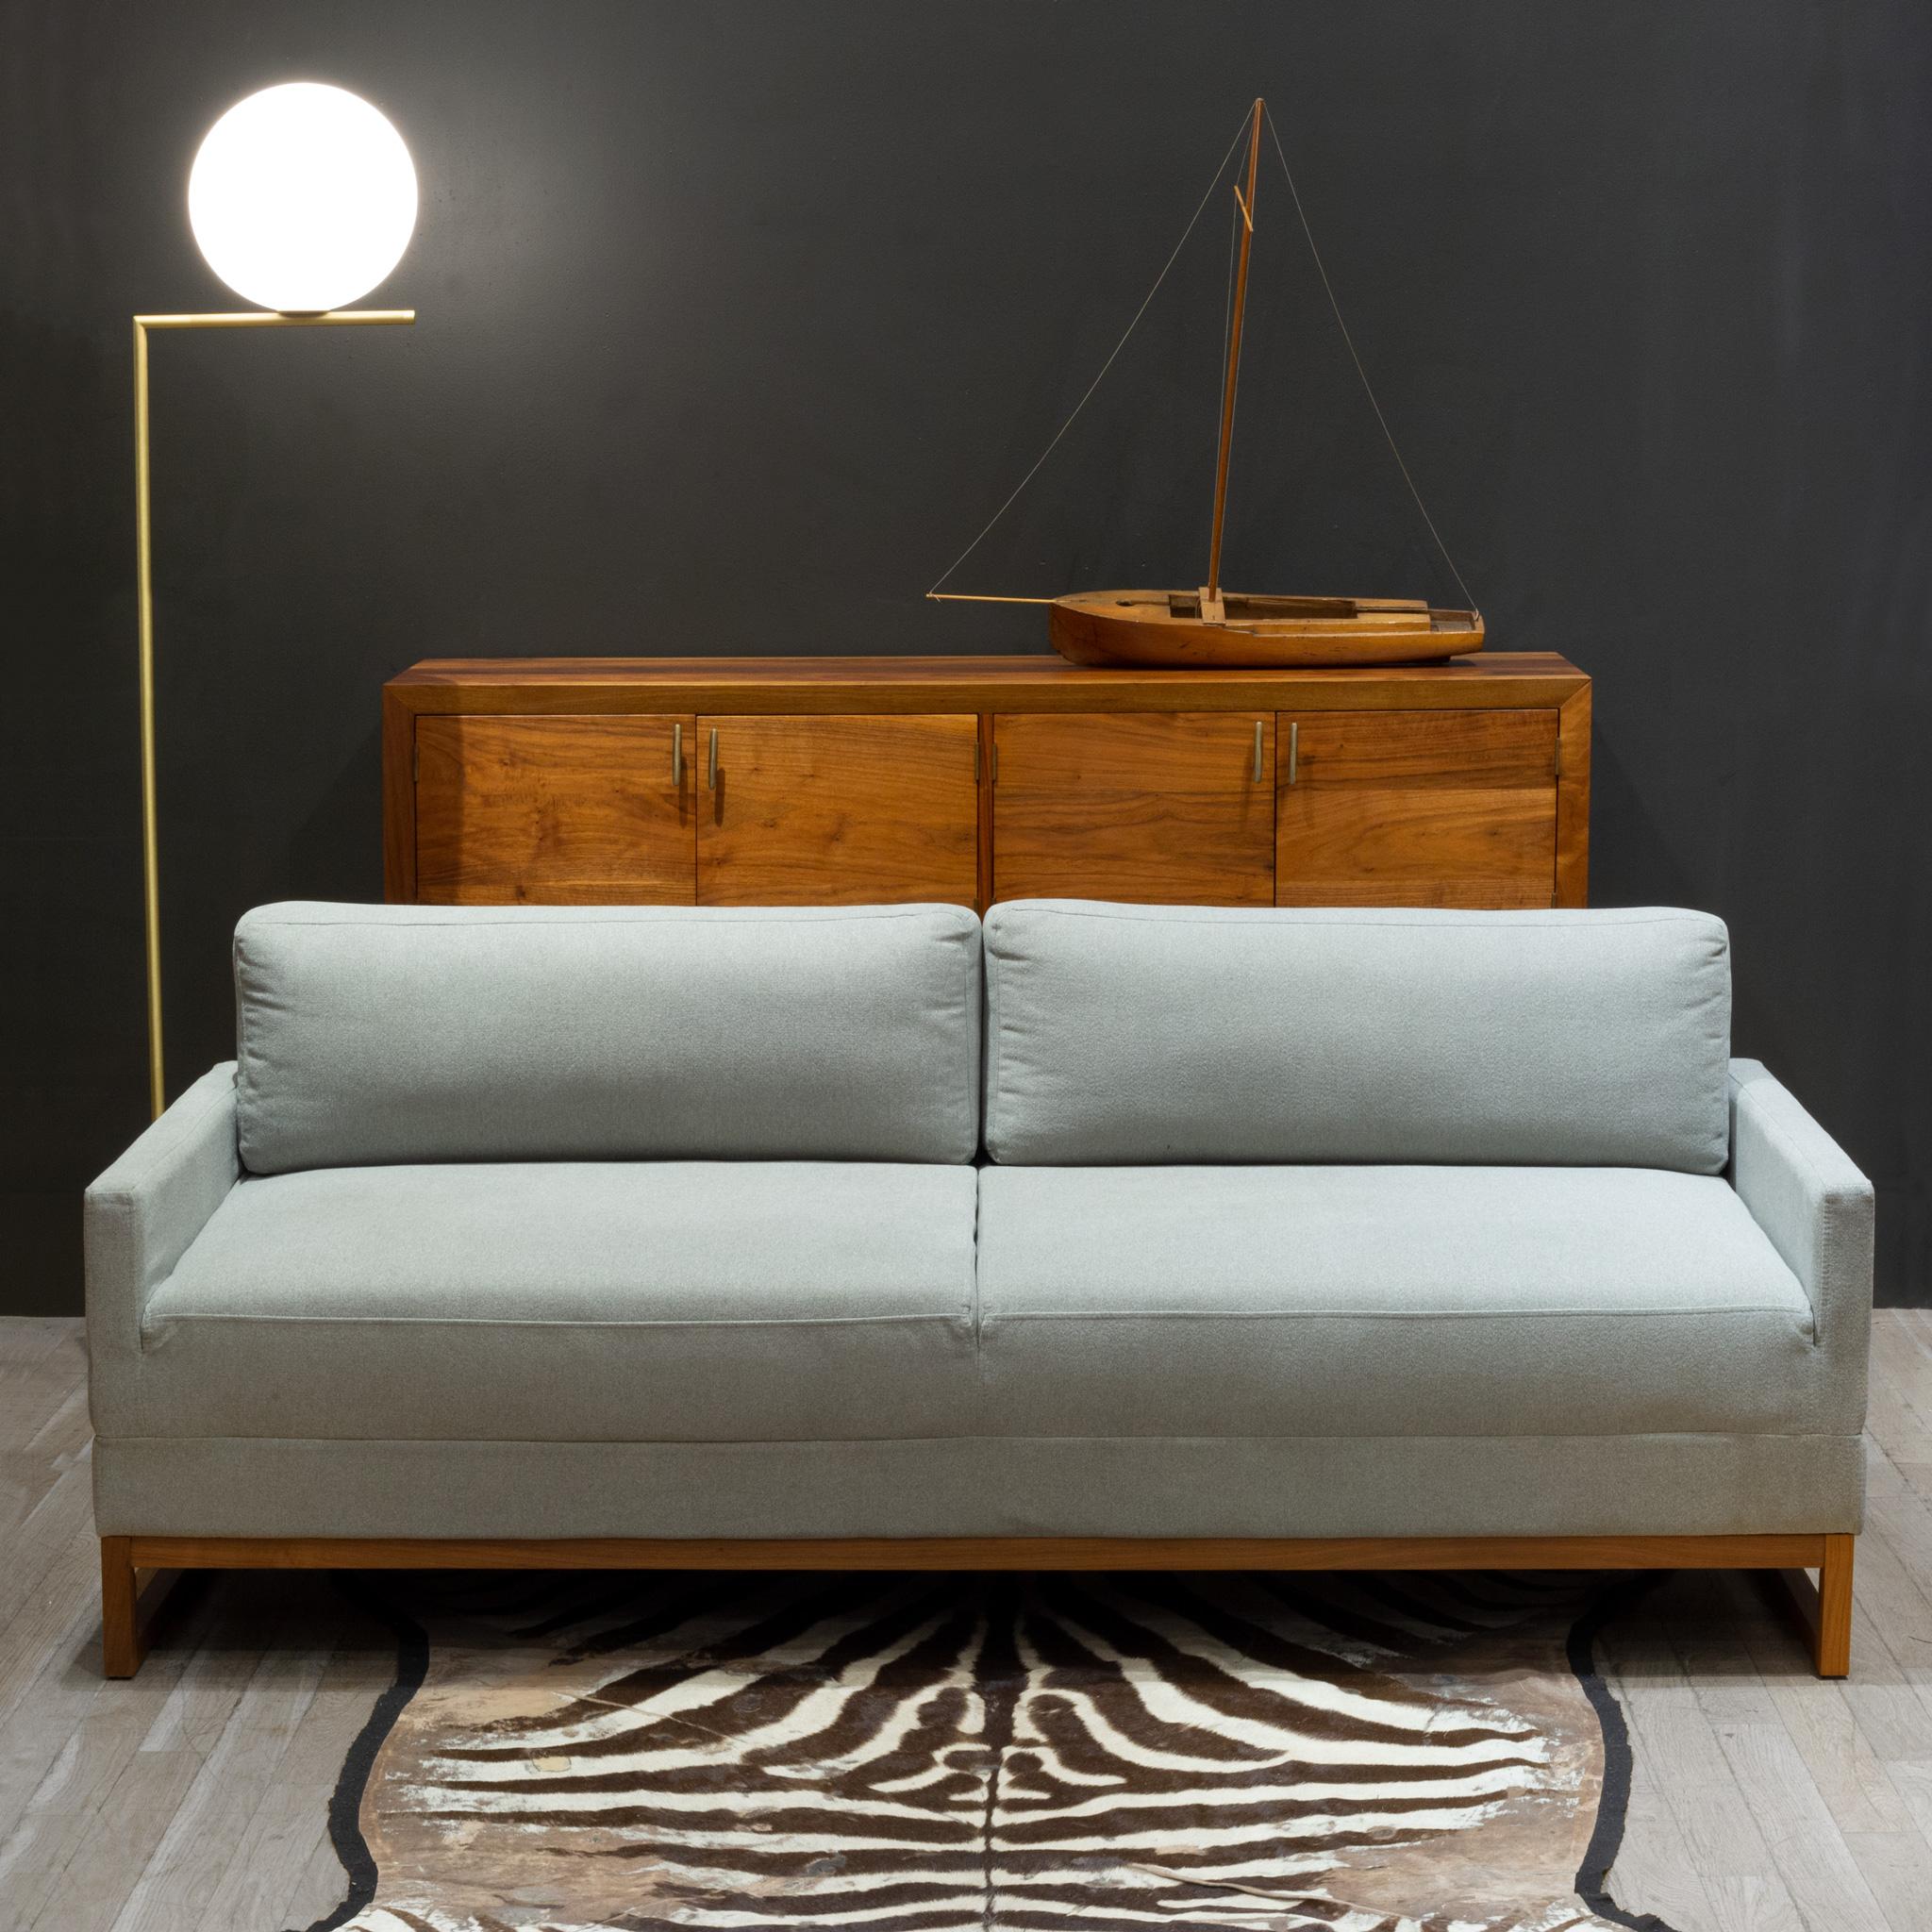 ABOUT

Contact us for more shipping options: S16 Home San Francisco. 

Sofa by day, sleeper by night. This warm and inviting sofa flips forward to become a queen-sized sleeper at a moment's notice. Wooden legs with wool fabric.

    CREATOR Blu Dot
